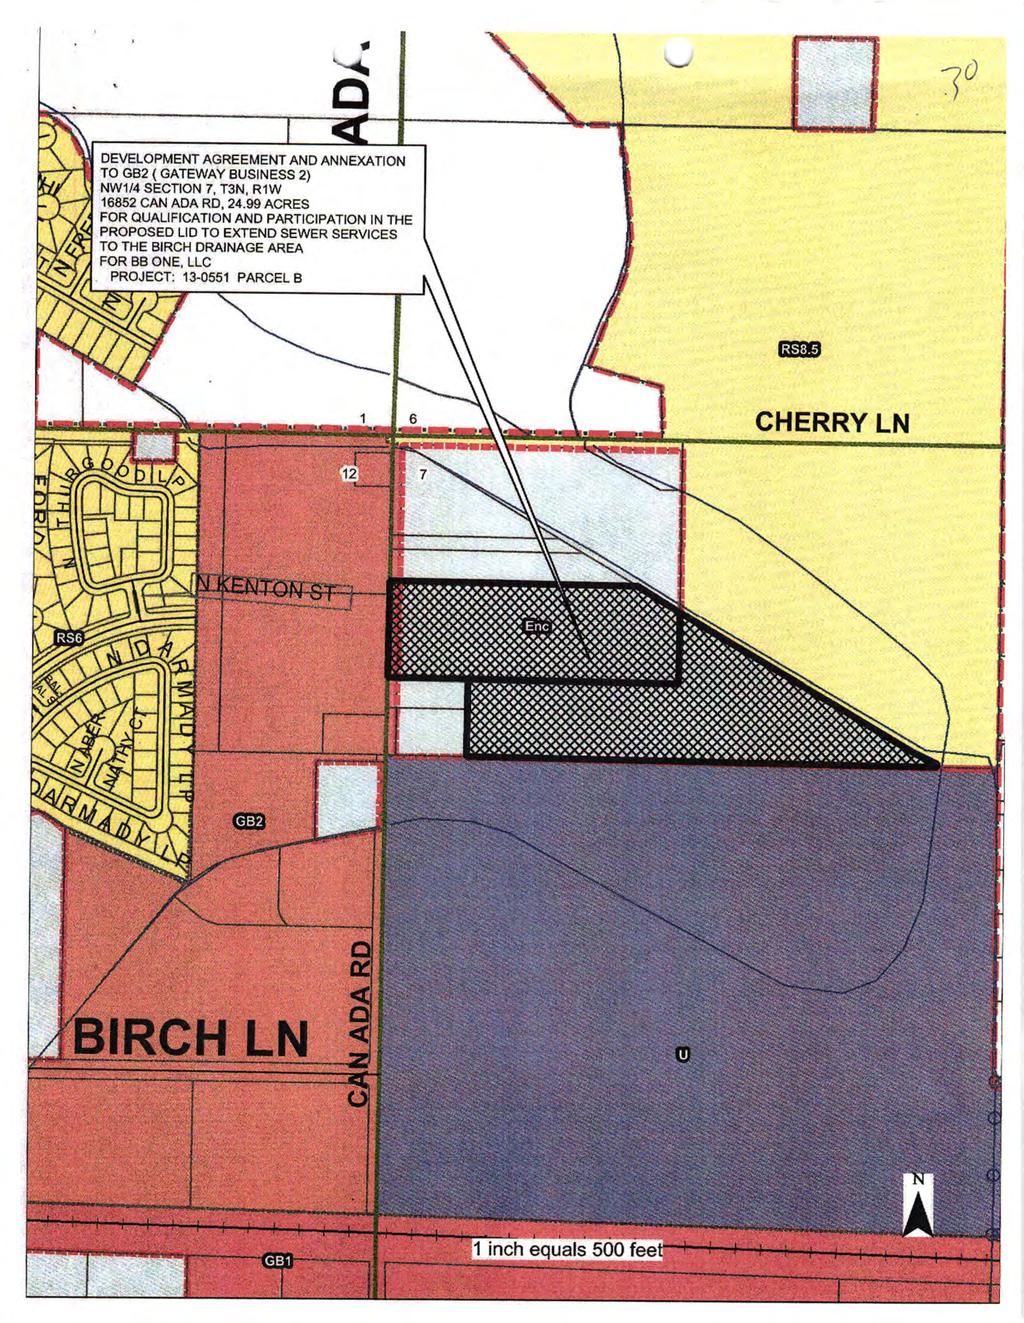 '{ 3 0 DEVELOPMENT AGREEMENT AND ANNEXATON TO GB2 ( GATEWAY BUSTNESS 2) NW1/4 SECON 7, T3N. R1W 16852 CAN ADA RD, 24.